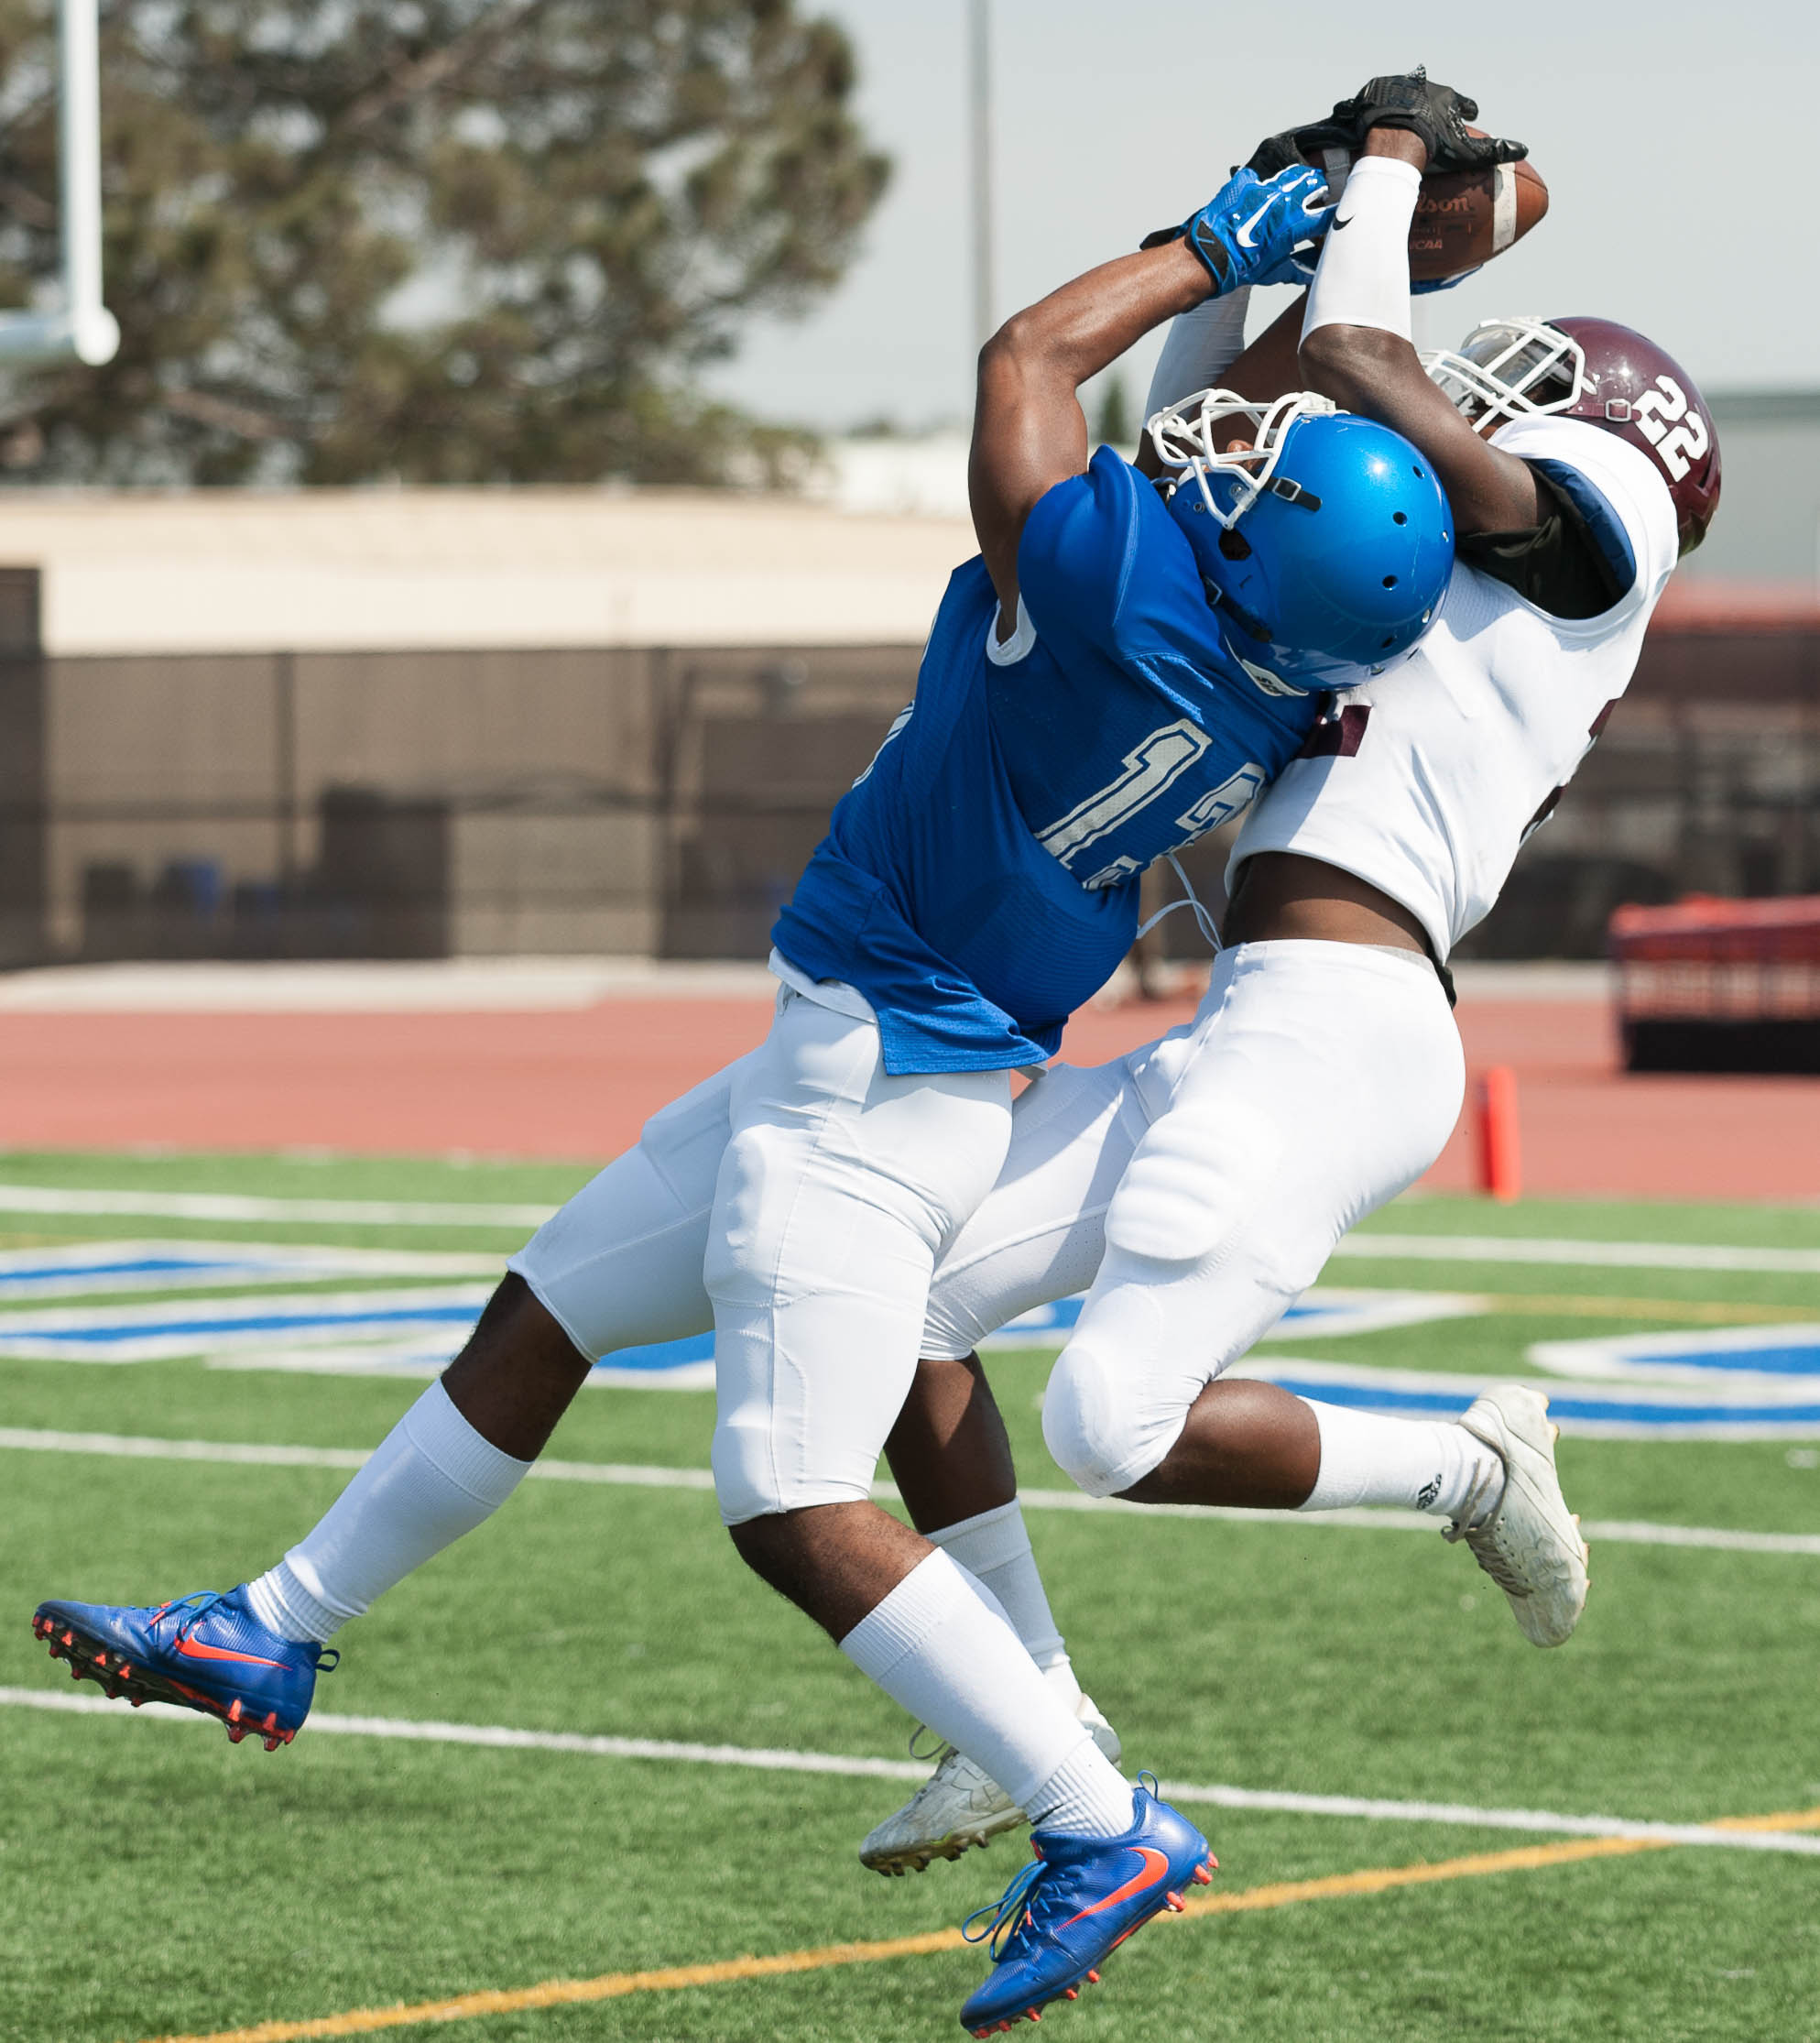  Wide receiver Elijah Boykin (13) of the Santa Monica College makes a contested catch against defensive back Nathaniel Ferguson (22) of Mt. San Antonio College. The Corsairs fell short 6-41 to the Mt. San Antonio Mounties, losing their second game in